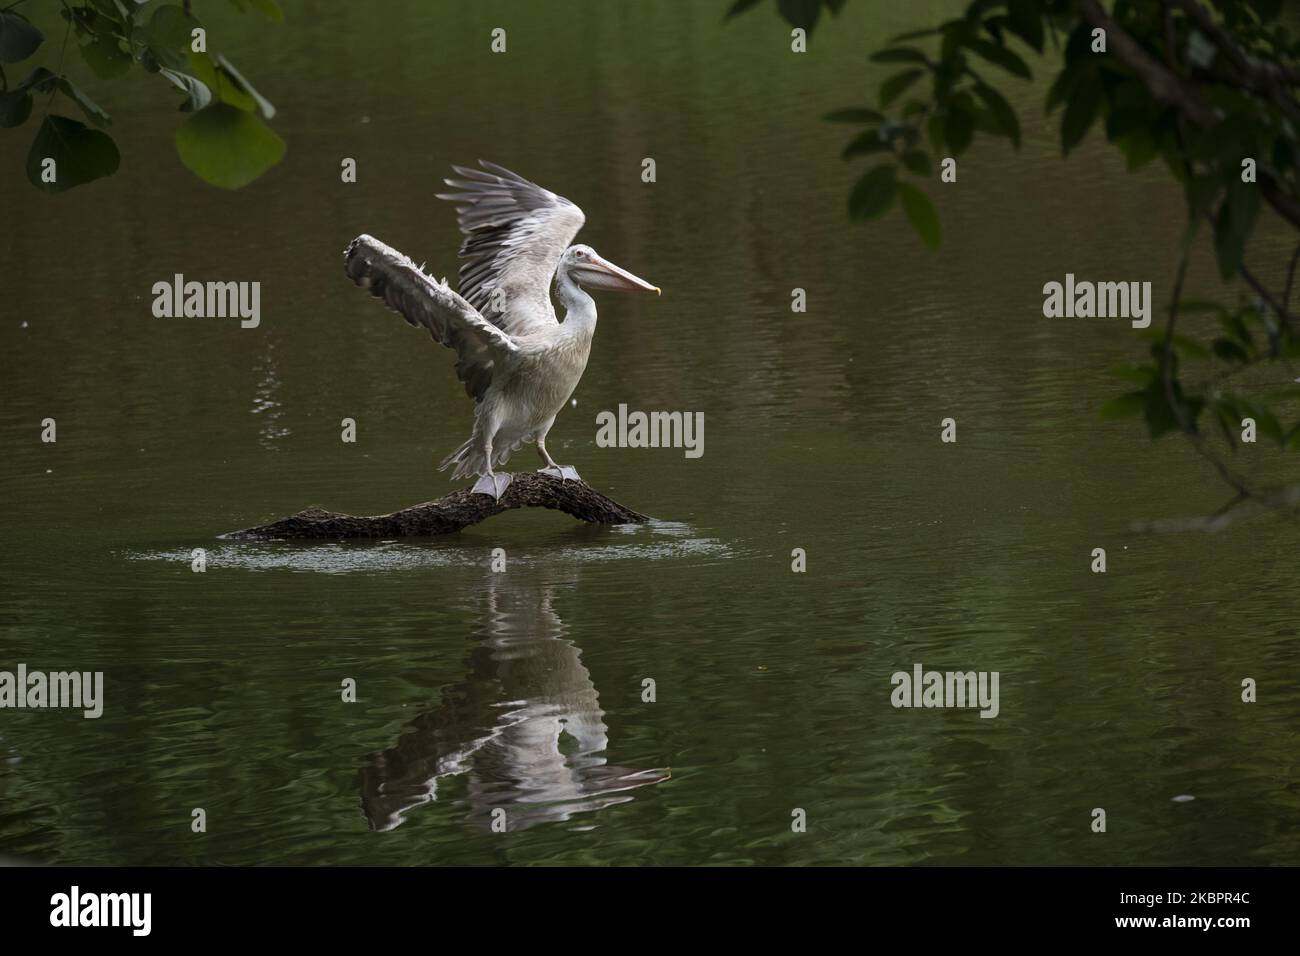 A spot-billed pelican is seen at Hlawga National Park on the United Nations' World Environment Day, on the outskirts of Yangon on June 5, 2020. World Environment Day, which encourages worldwide awareness and action for the protection of the environment. The theme for this year is “Biodiversity”. Hlawga National Park was created as an environmental education center in 1982. It is home to 25 species of mammals, 9 species of reptiles, 54 species of amphibians, 192 species of birds, 103 species of butterfly and 23 species of fish. (Photo by Shwe Paw Mya Tin/NurPhoto) Stock Photo